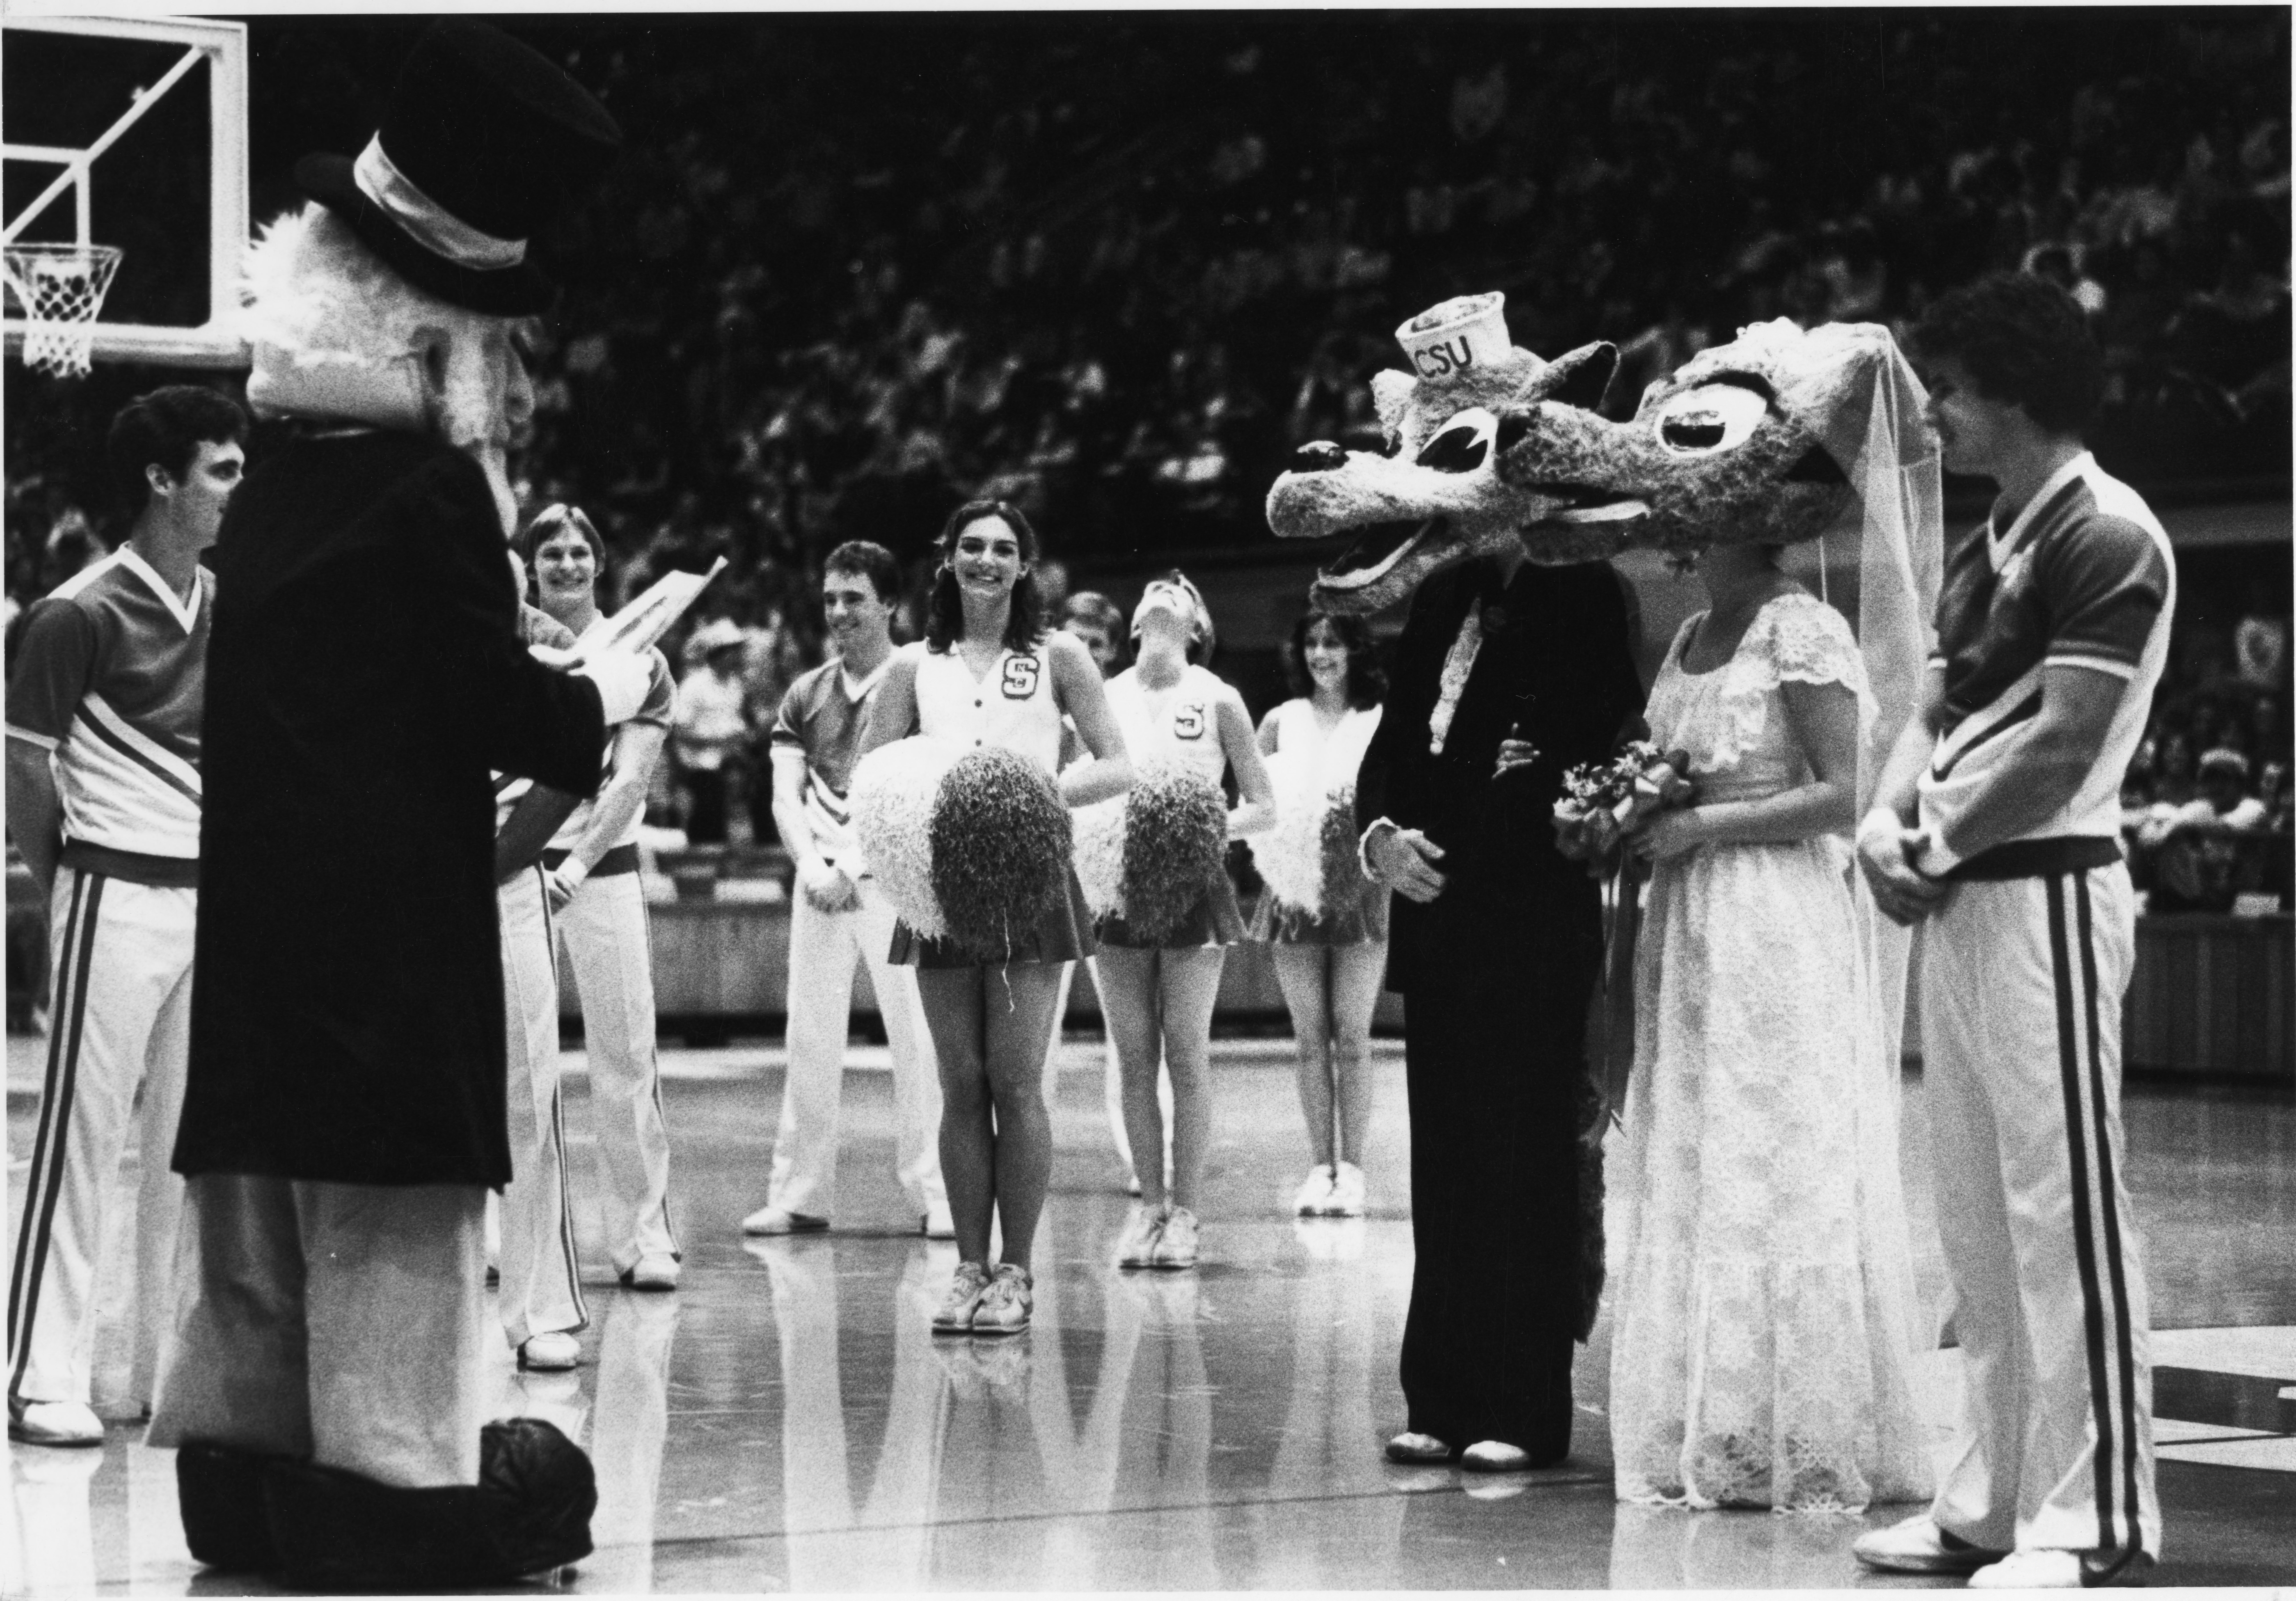 The Demon Deacon officiates the wedding ceremony for Mr. and Ms. Wuf (1981).